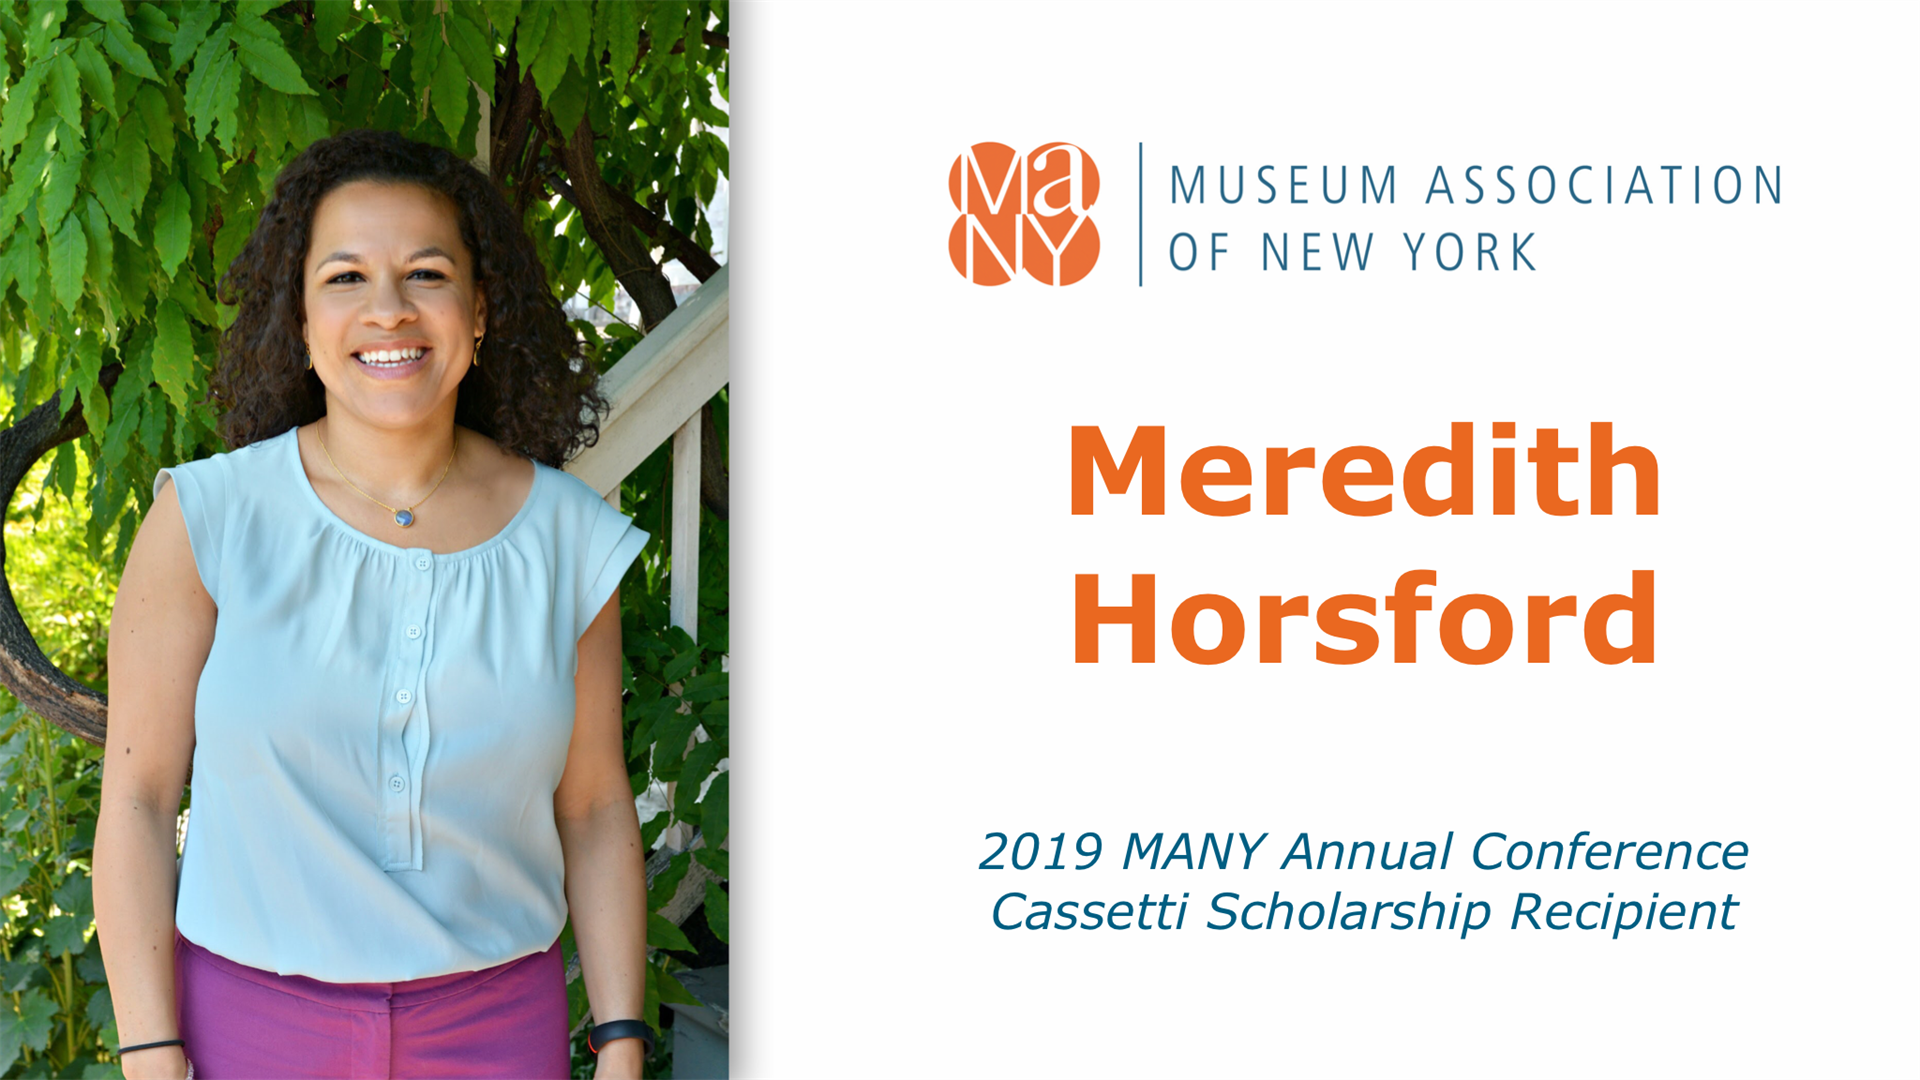 Museum Association Of New York Many Awards Meredith Horsford For